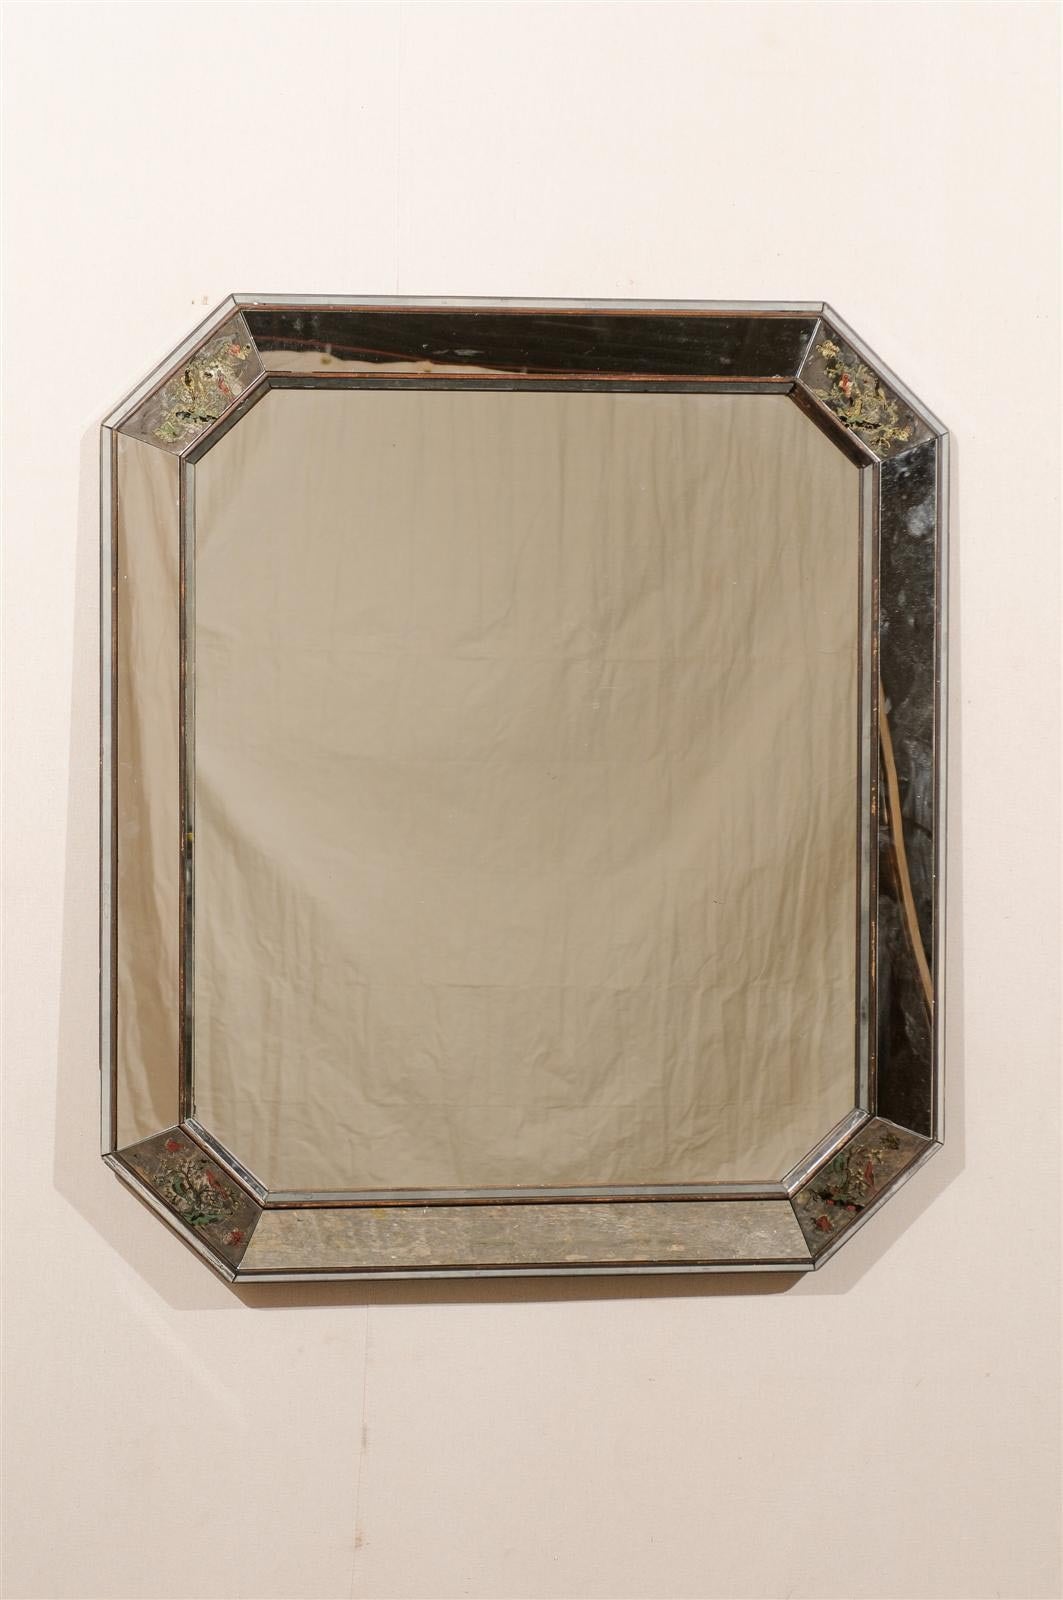 An octagonal early 20th century American mirror with lovely bird scenes painted in the corners, slightly beveled panels and wooden trim.